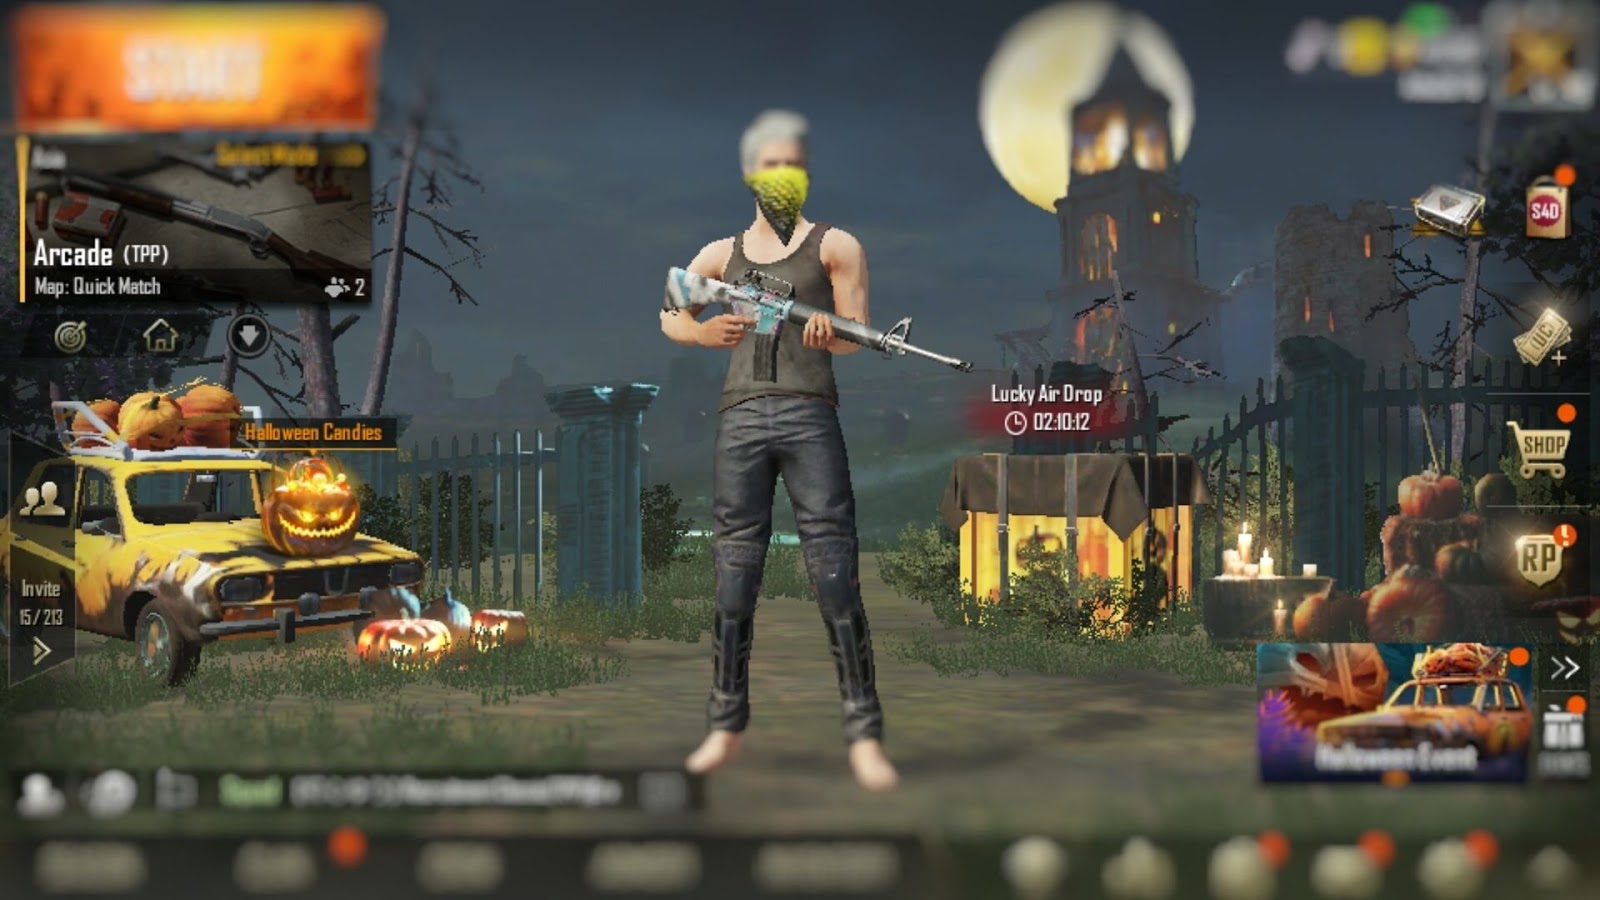 Fix Pubg Mobile Voice Chat Issue On Android Phone And Emulator